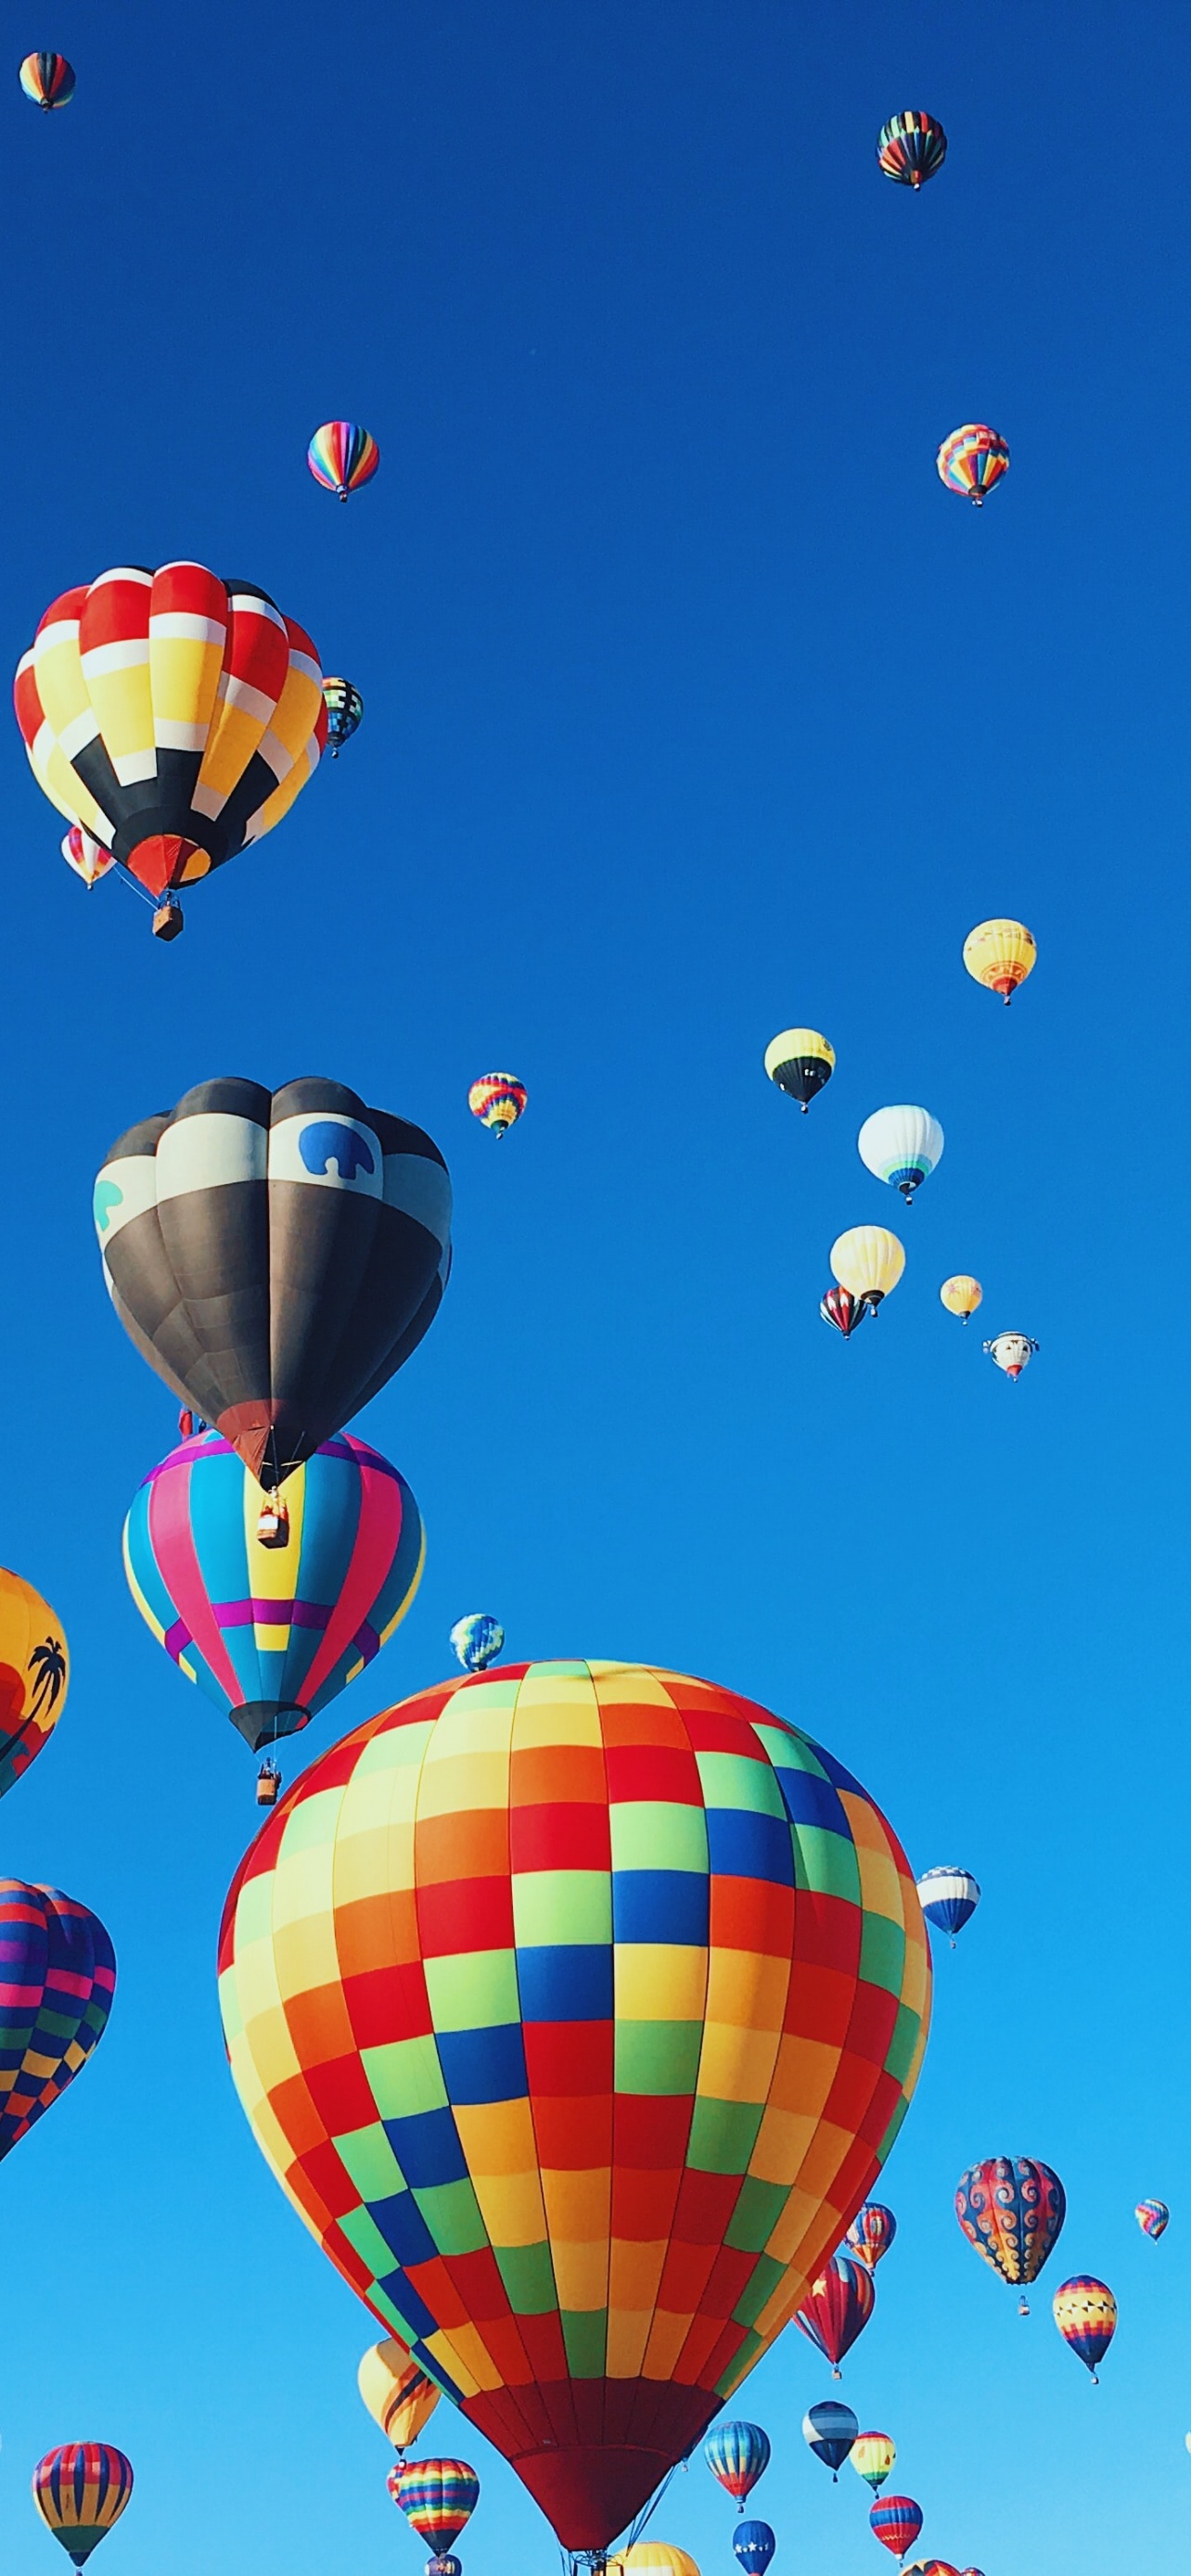 Hot air balloons Wallpaper 4K, Festival, Colorful, Photography, #1117